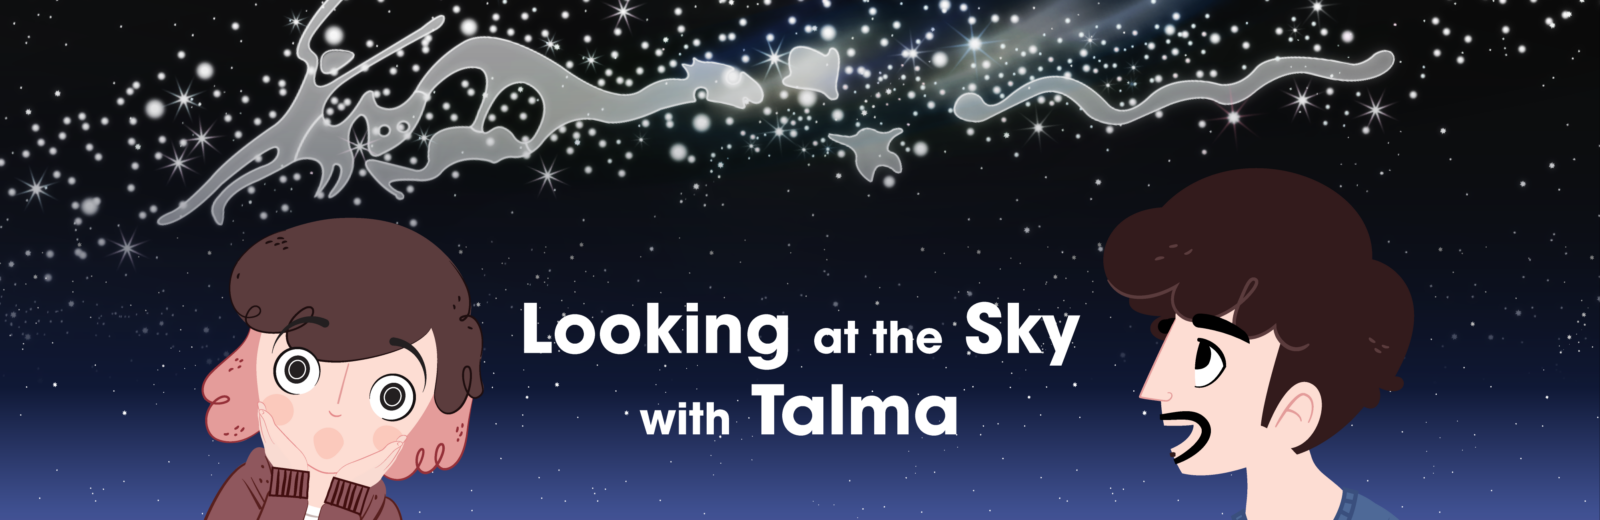 Looking at the Sky with Talma